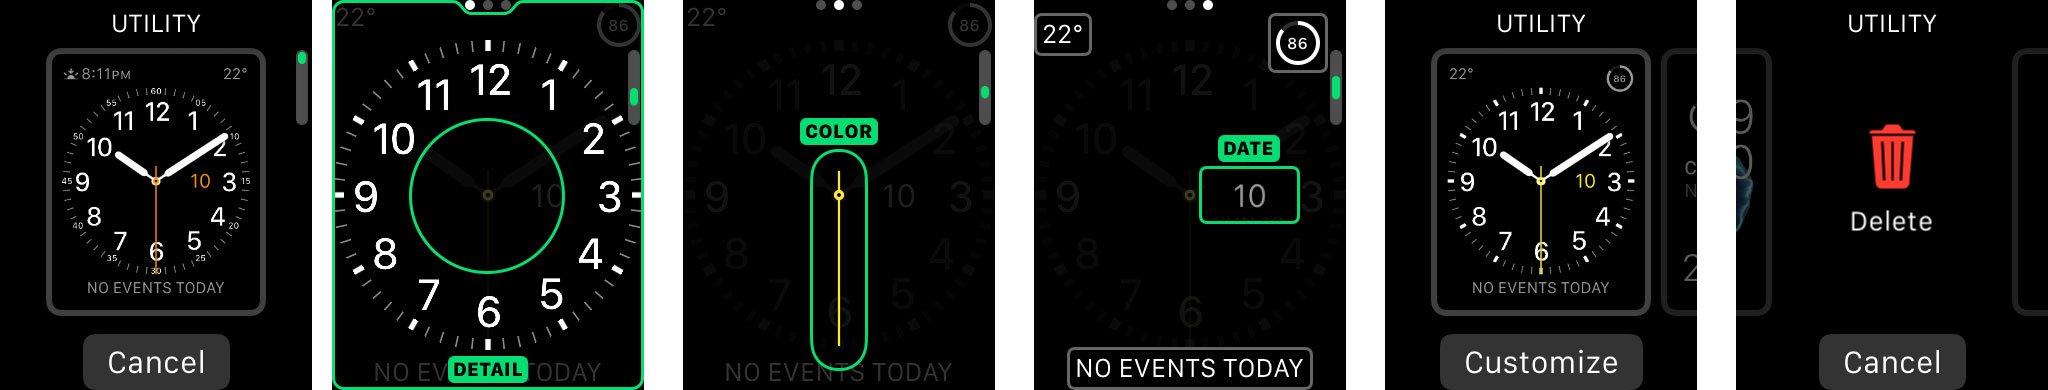 Adding a new clock face version, customizing details, color, and complications, and trashing it